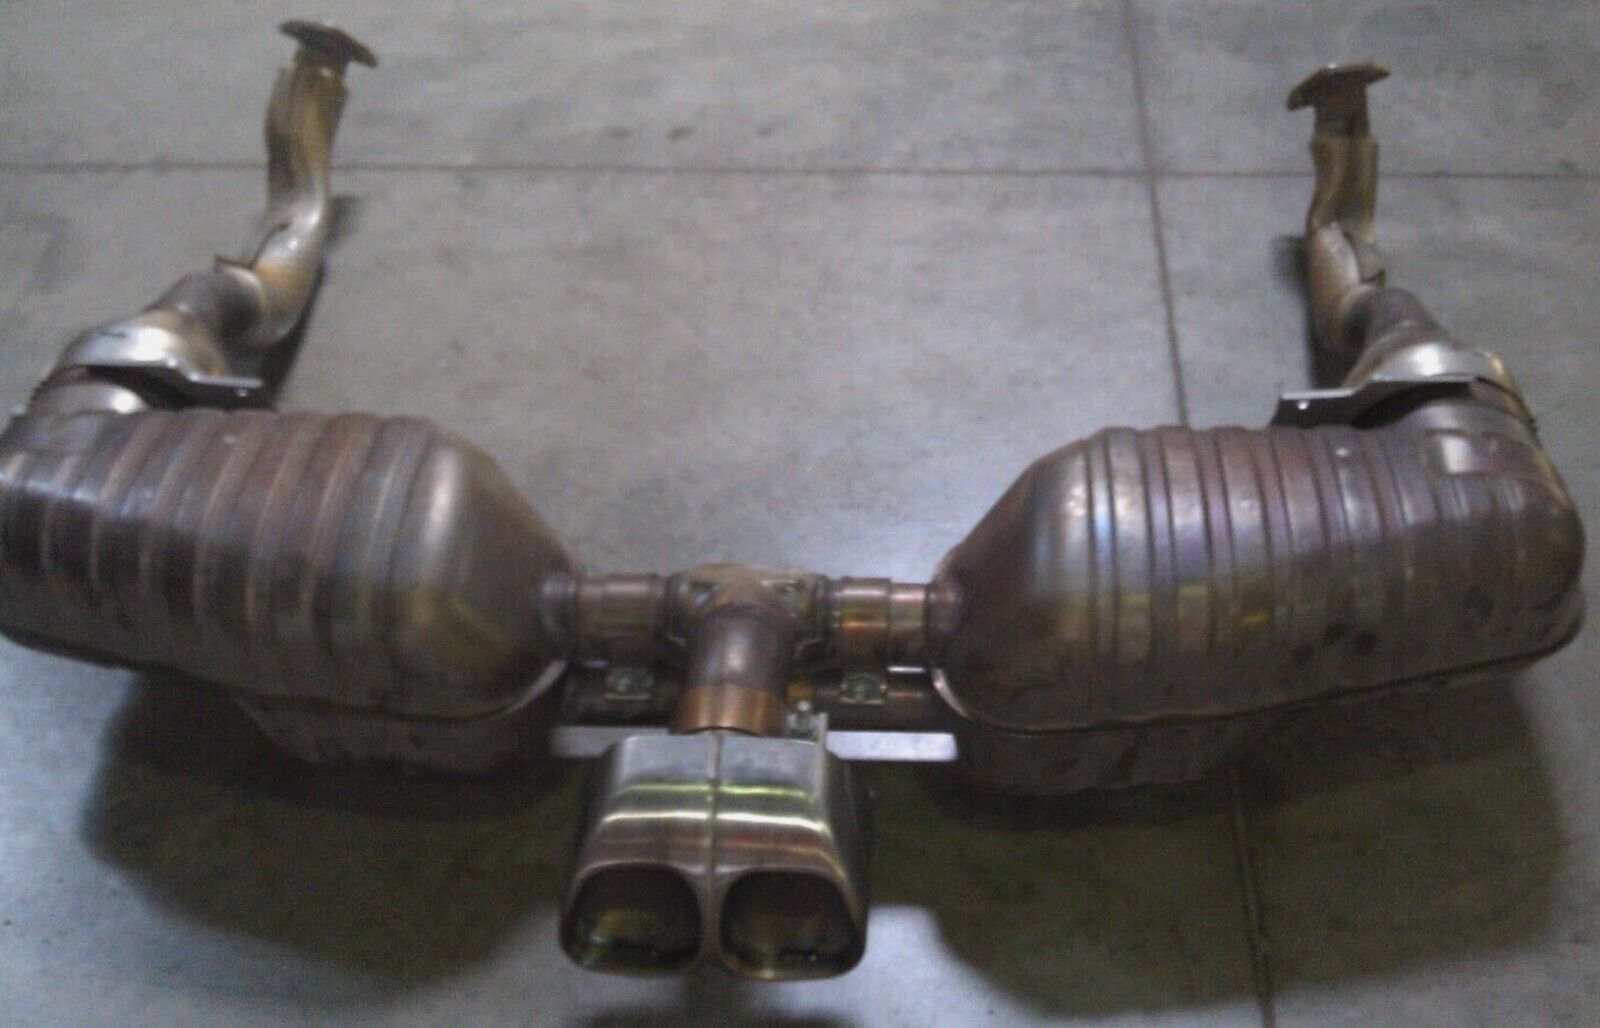 PORSCHE 987 CAYMAN S EXHAUST - OEM REMOVED FROM 2006 CAYMAN S